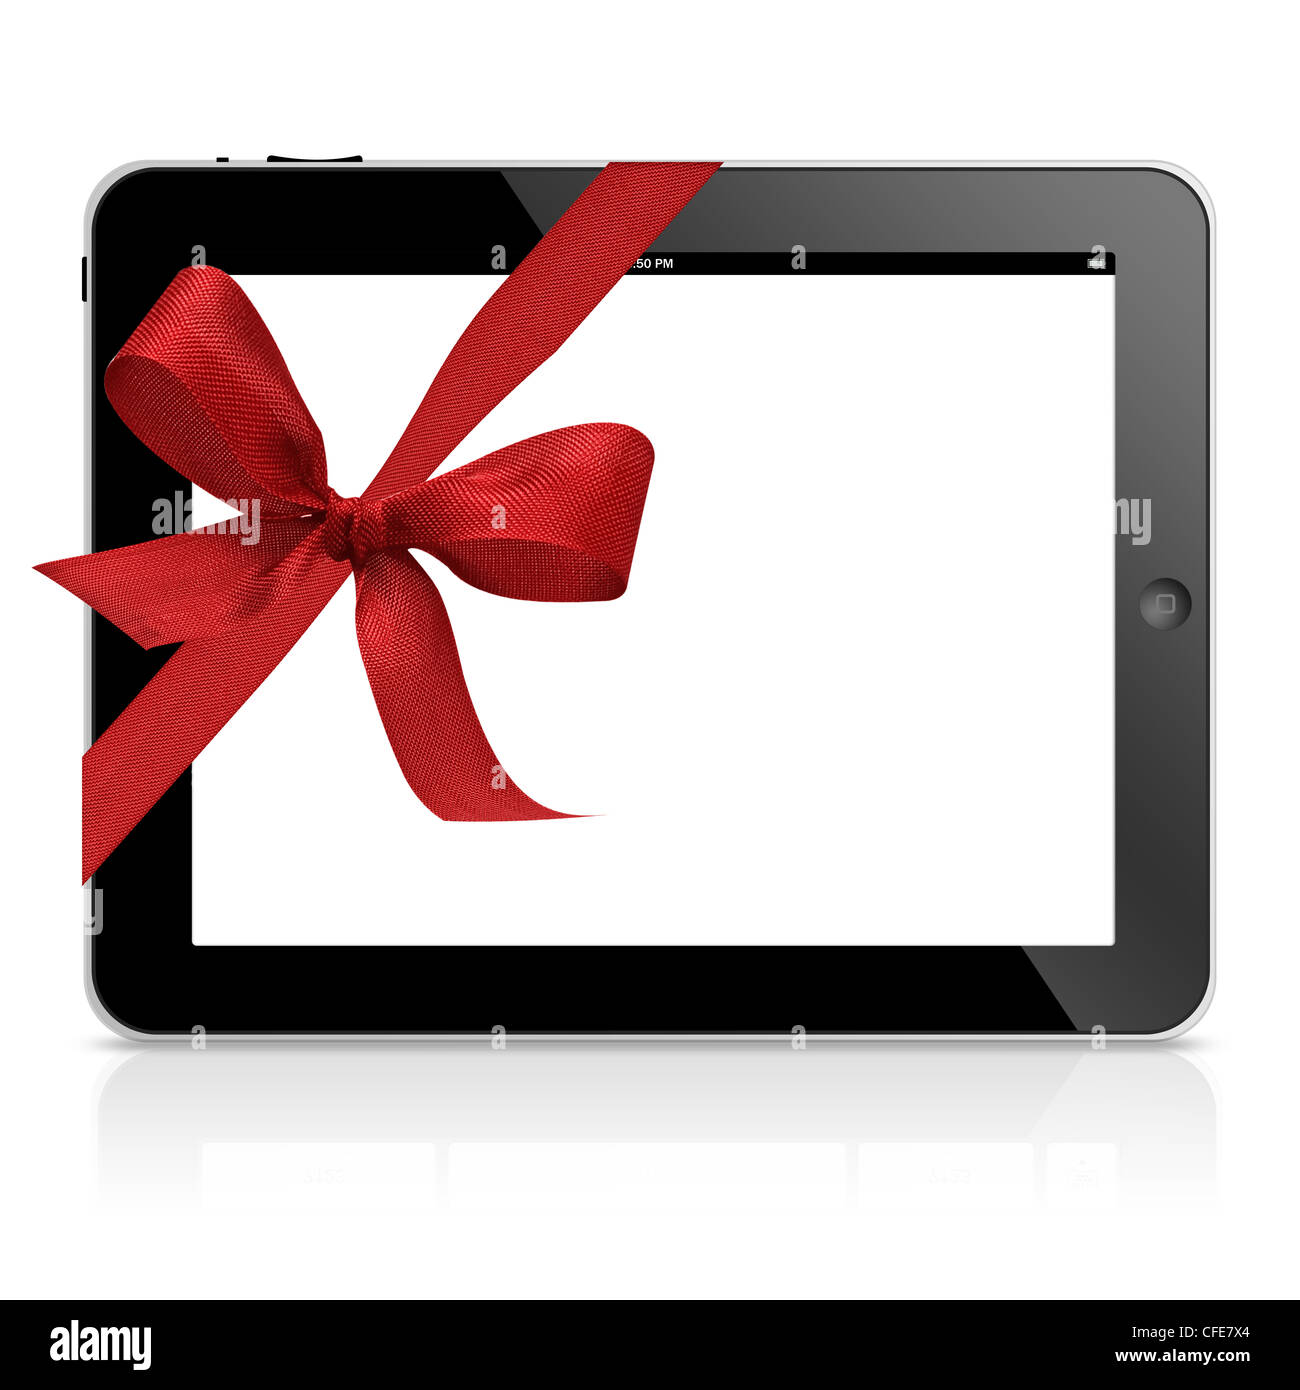 ipad tablet computer with Red Satin gift ribbon isolated on white background Stock Photo